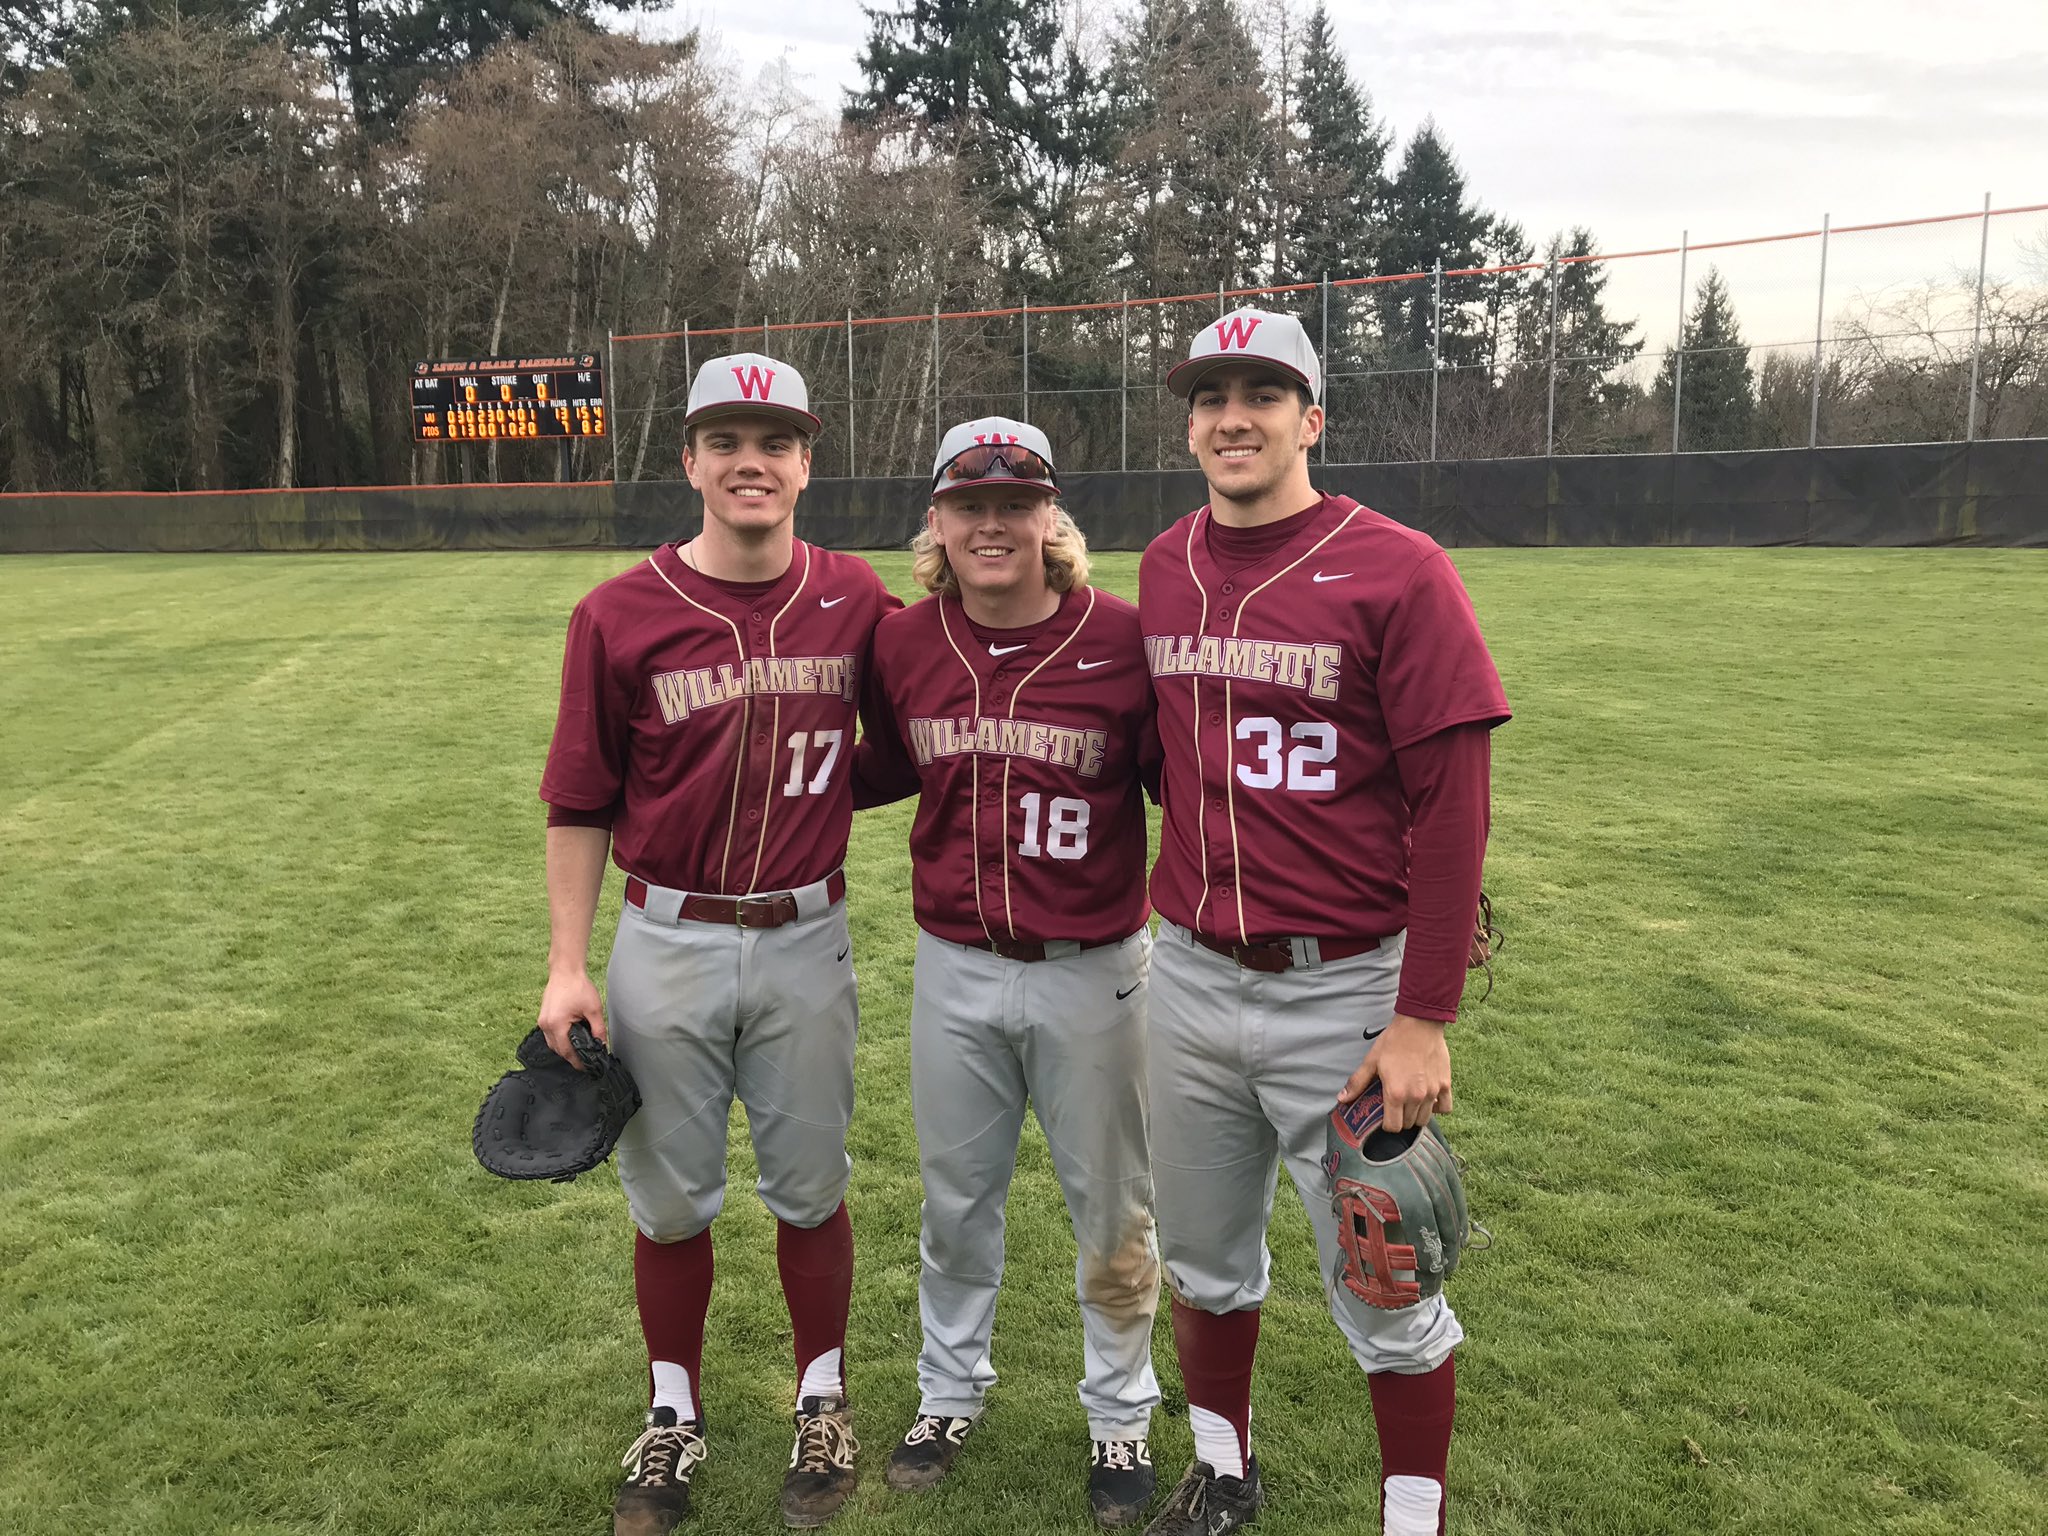 Willamette Baseball on Twitter "Bearcats win 137 and take the series